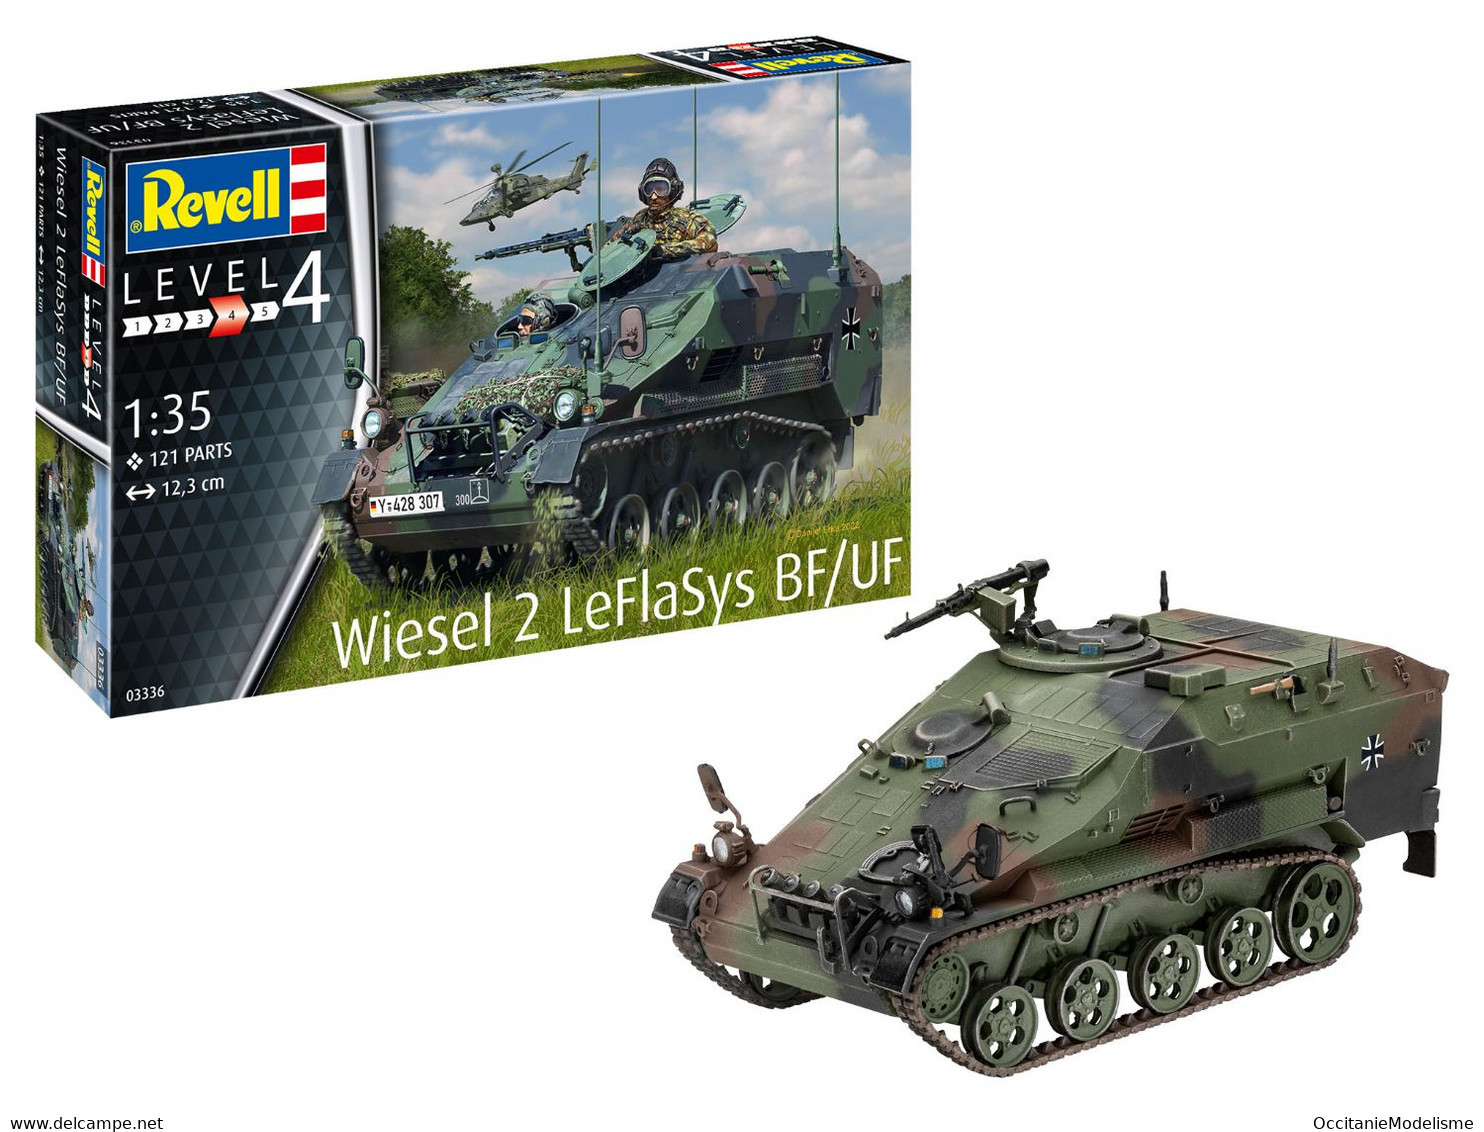 Revell - CHAR WIESEL 2 LeFlaSys BF/UF Maquette Militaire Kit Plastique Réf. 03336 Neuf NBO 1/35 - Véhicules Militaires